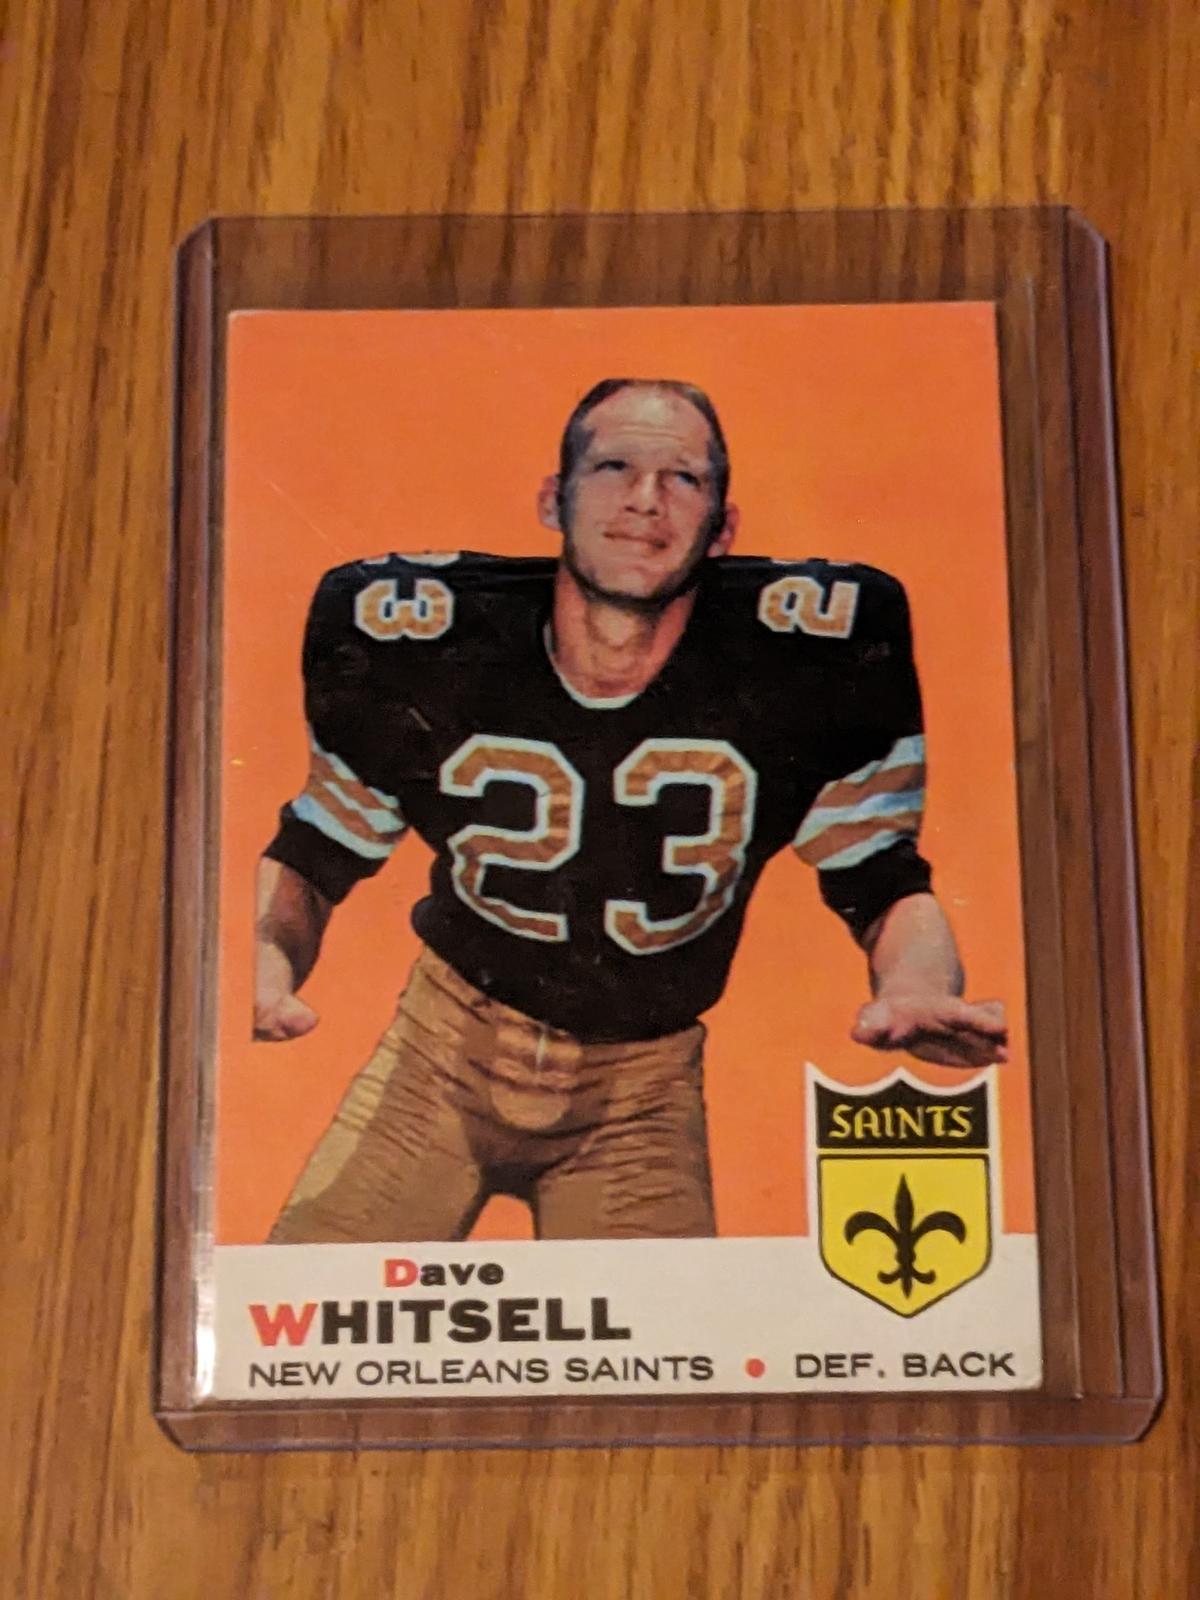 DAVE WHITSELL - 1969 TOPPS - BASE CARD # 14 - LIONS - BEARS - SAINTS - NFL